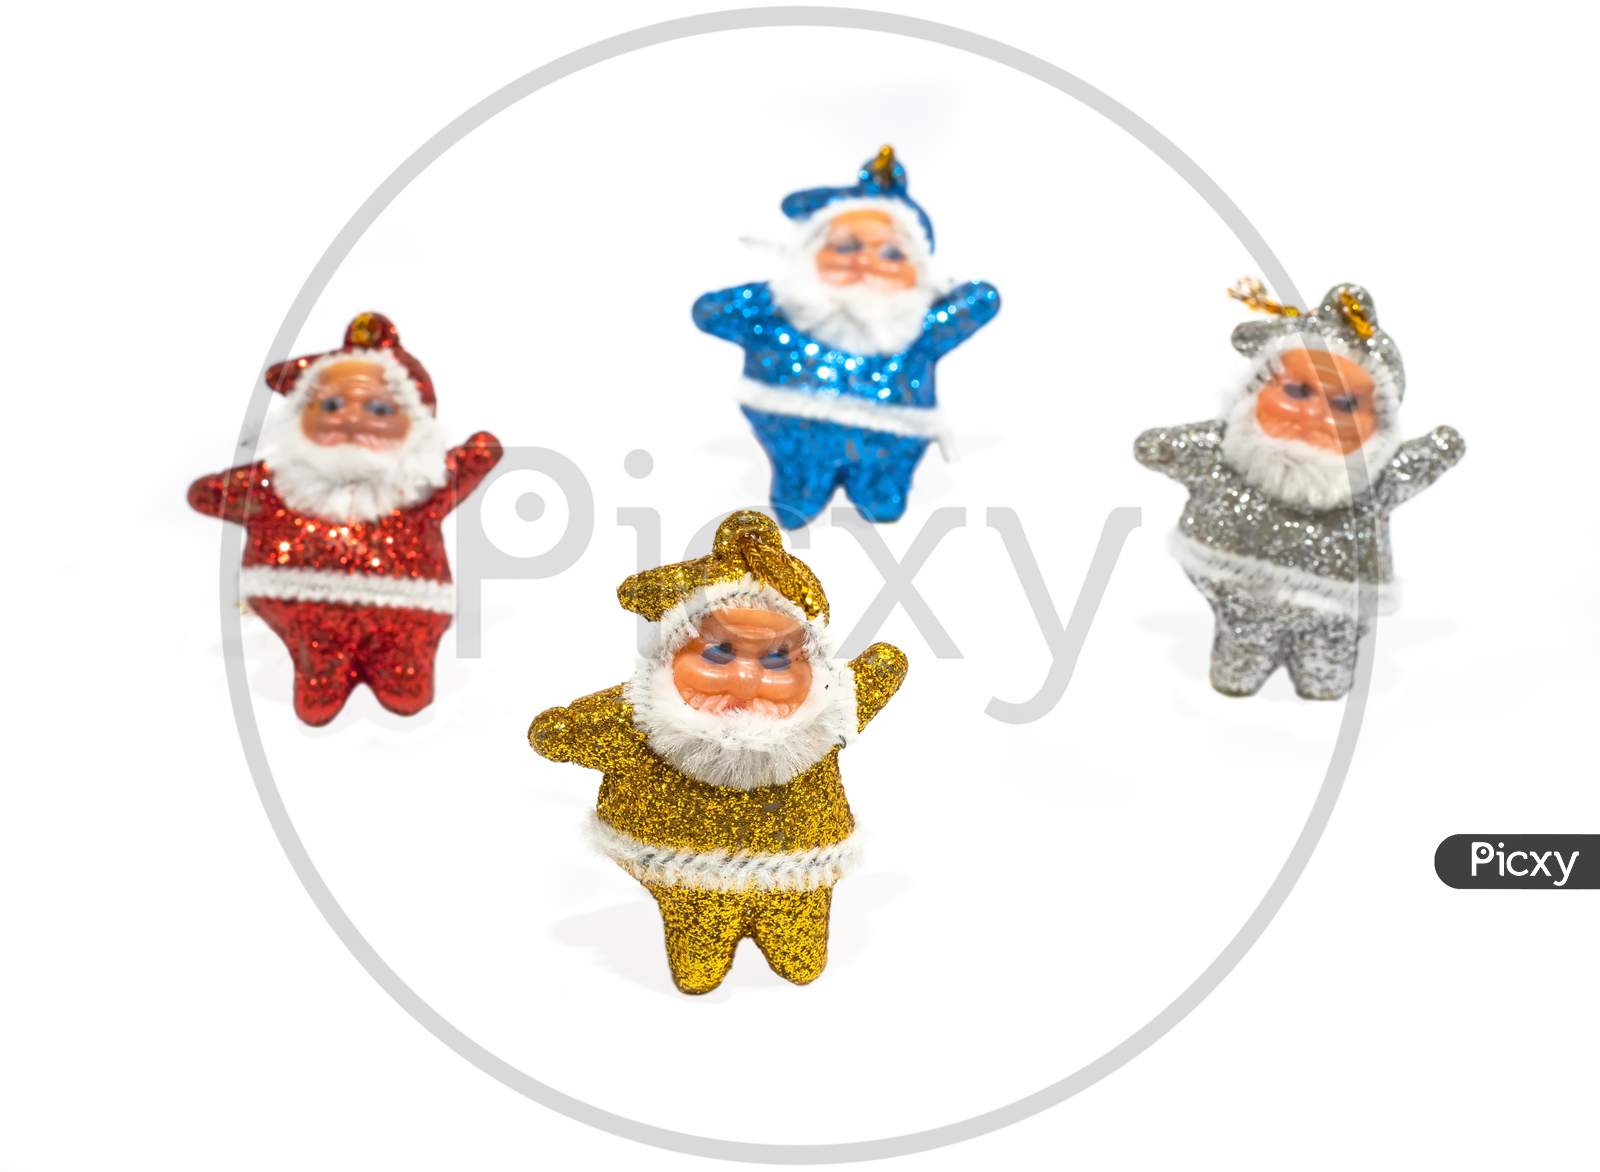 Multi-Colored Santa Claus On A White Background. Copy Space.